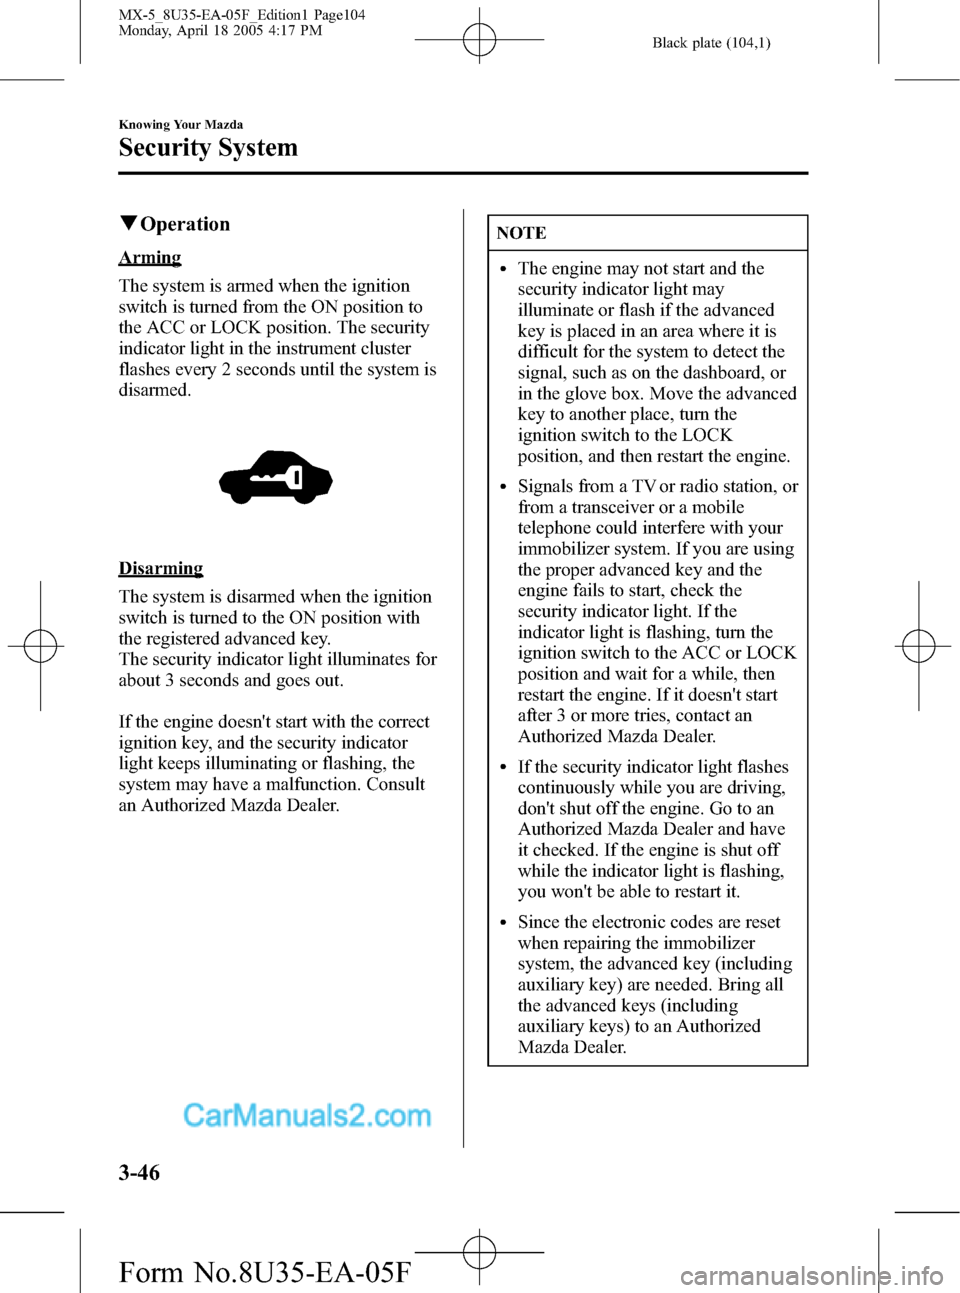 MAZDA MODEL MX-5 2006  Owners Manual (in English) Black plate (104,1)
qOperation
Arming
The system is armed when the ignition
switch is turned from the ON position to
the ACC or LOCK position. The security
indicator light in the instrument cluster
fl